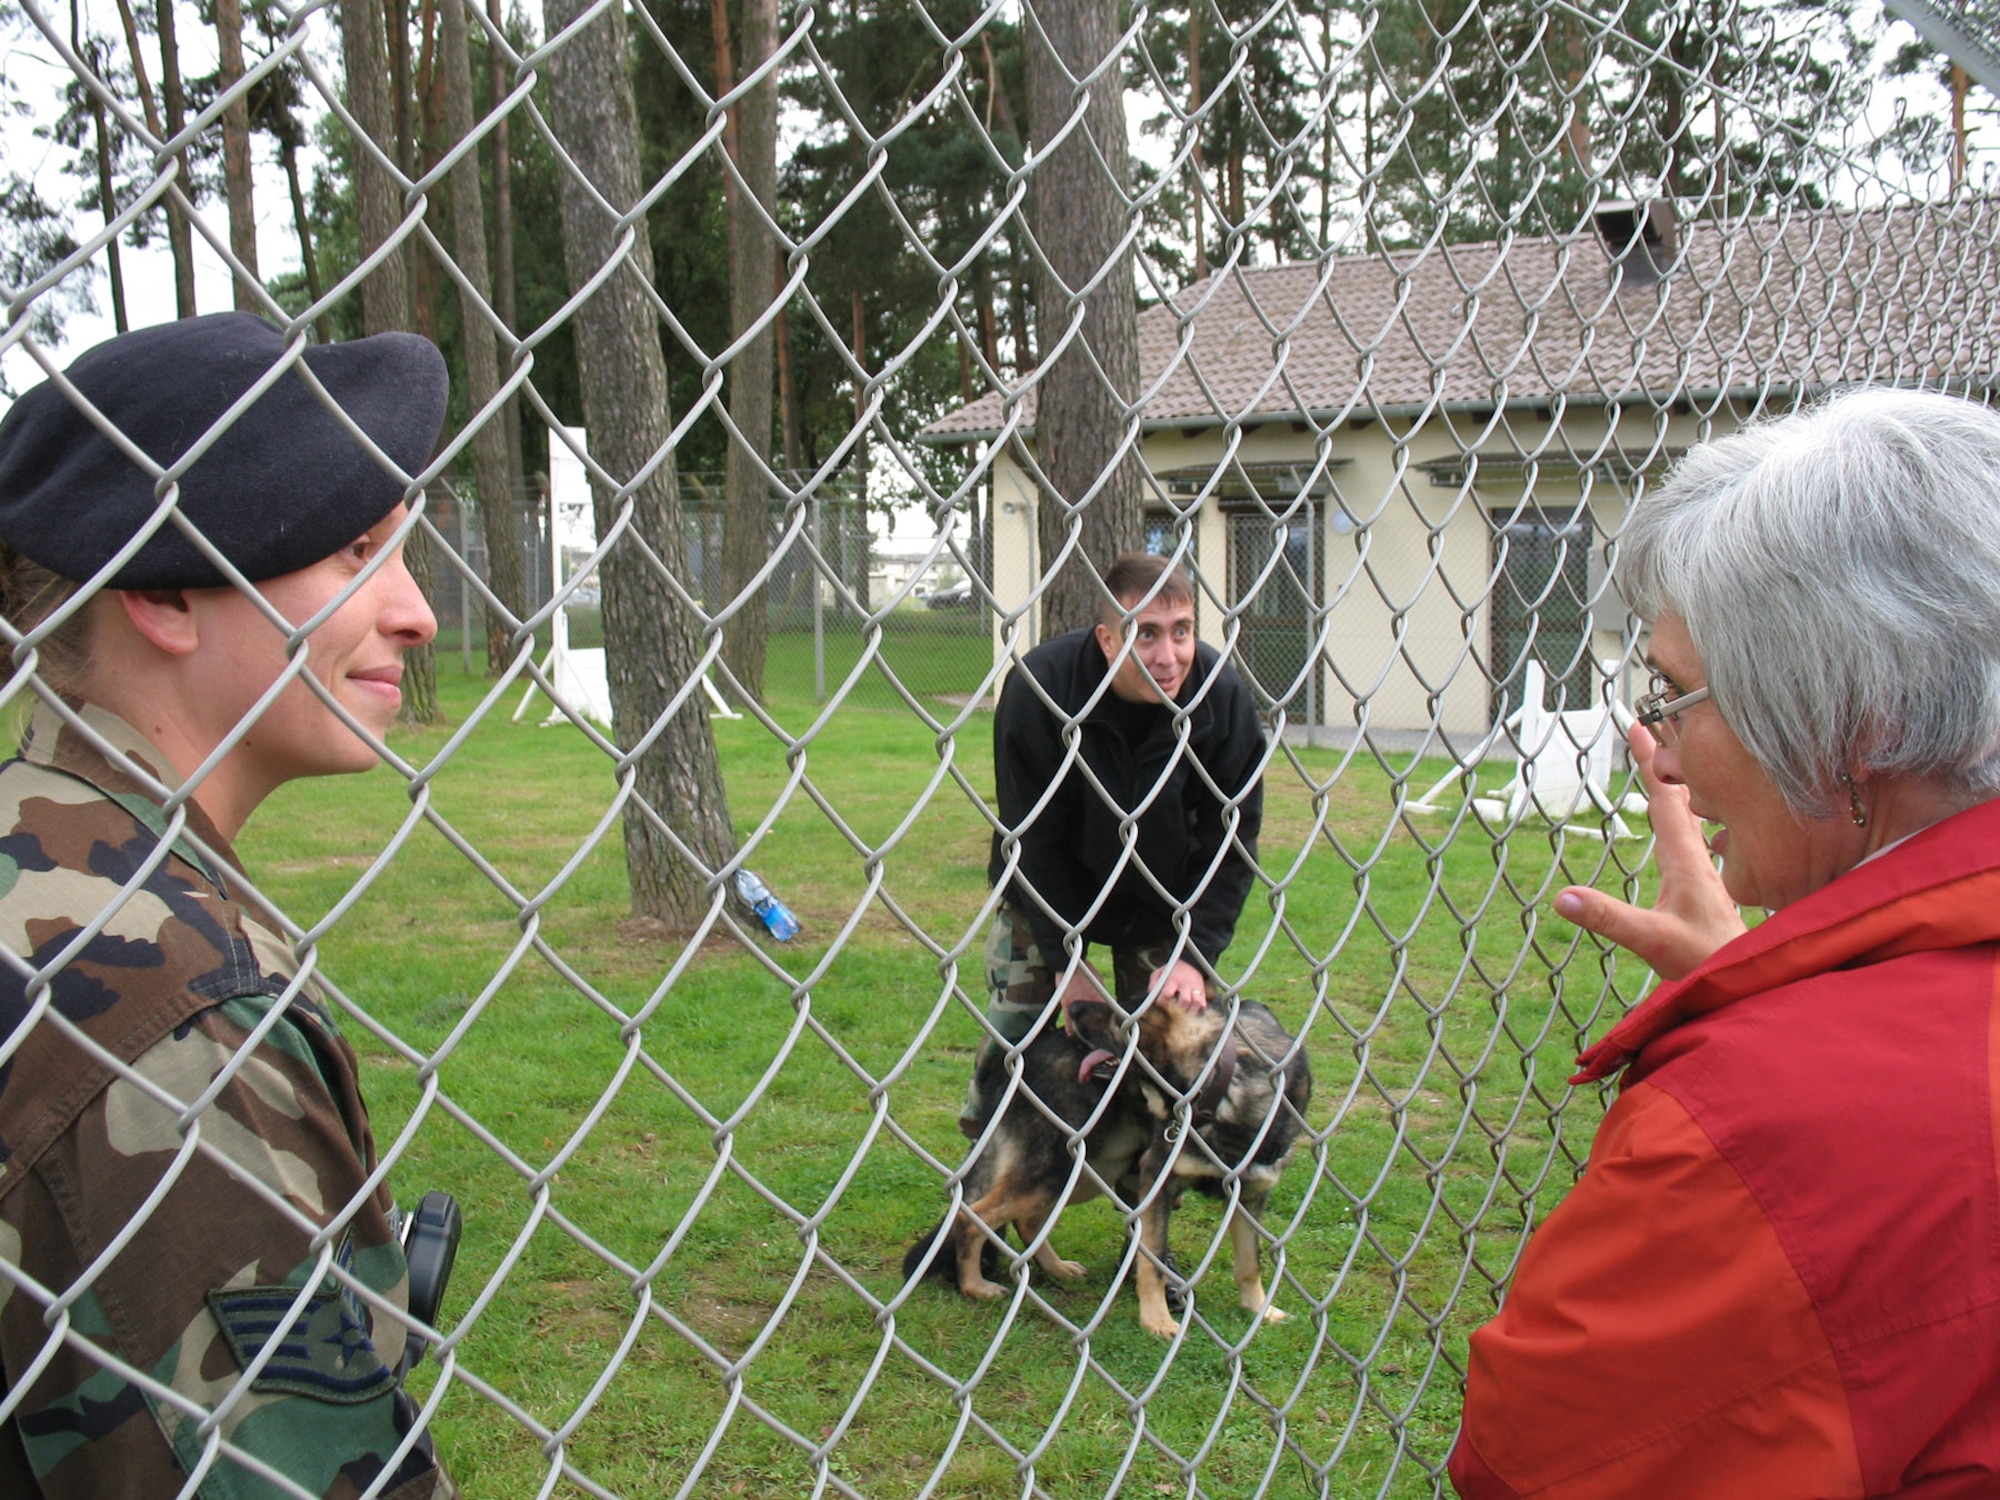 SPANGDAHLEM AIR BASE, Germany – Staff Sgt. Trica Hascall, 52nd Security Forces Squadron, talks with Marita Ortloff, Bitburg Police Station, about the military working dog program at Spangdahlem Air Base during the police station’s work outing Sept. 4, 2007. (U.S. Air Force photo/ Simone Chapman)